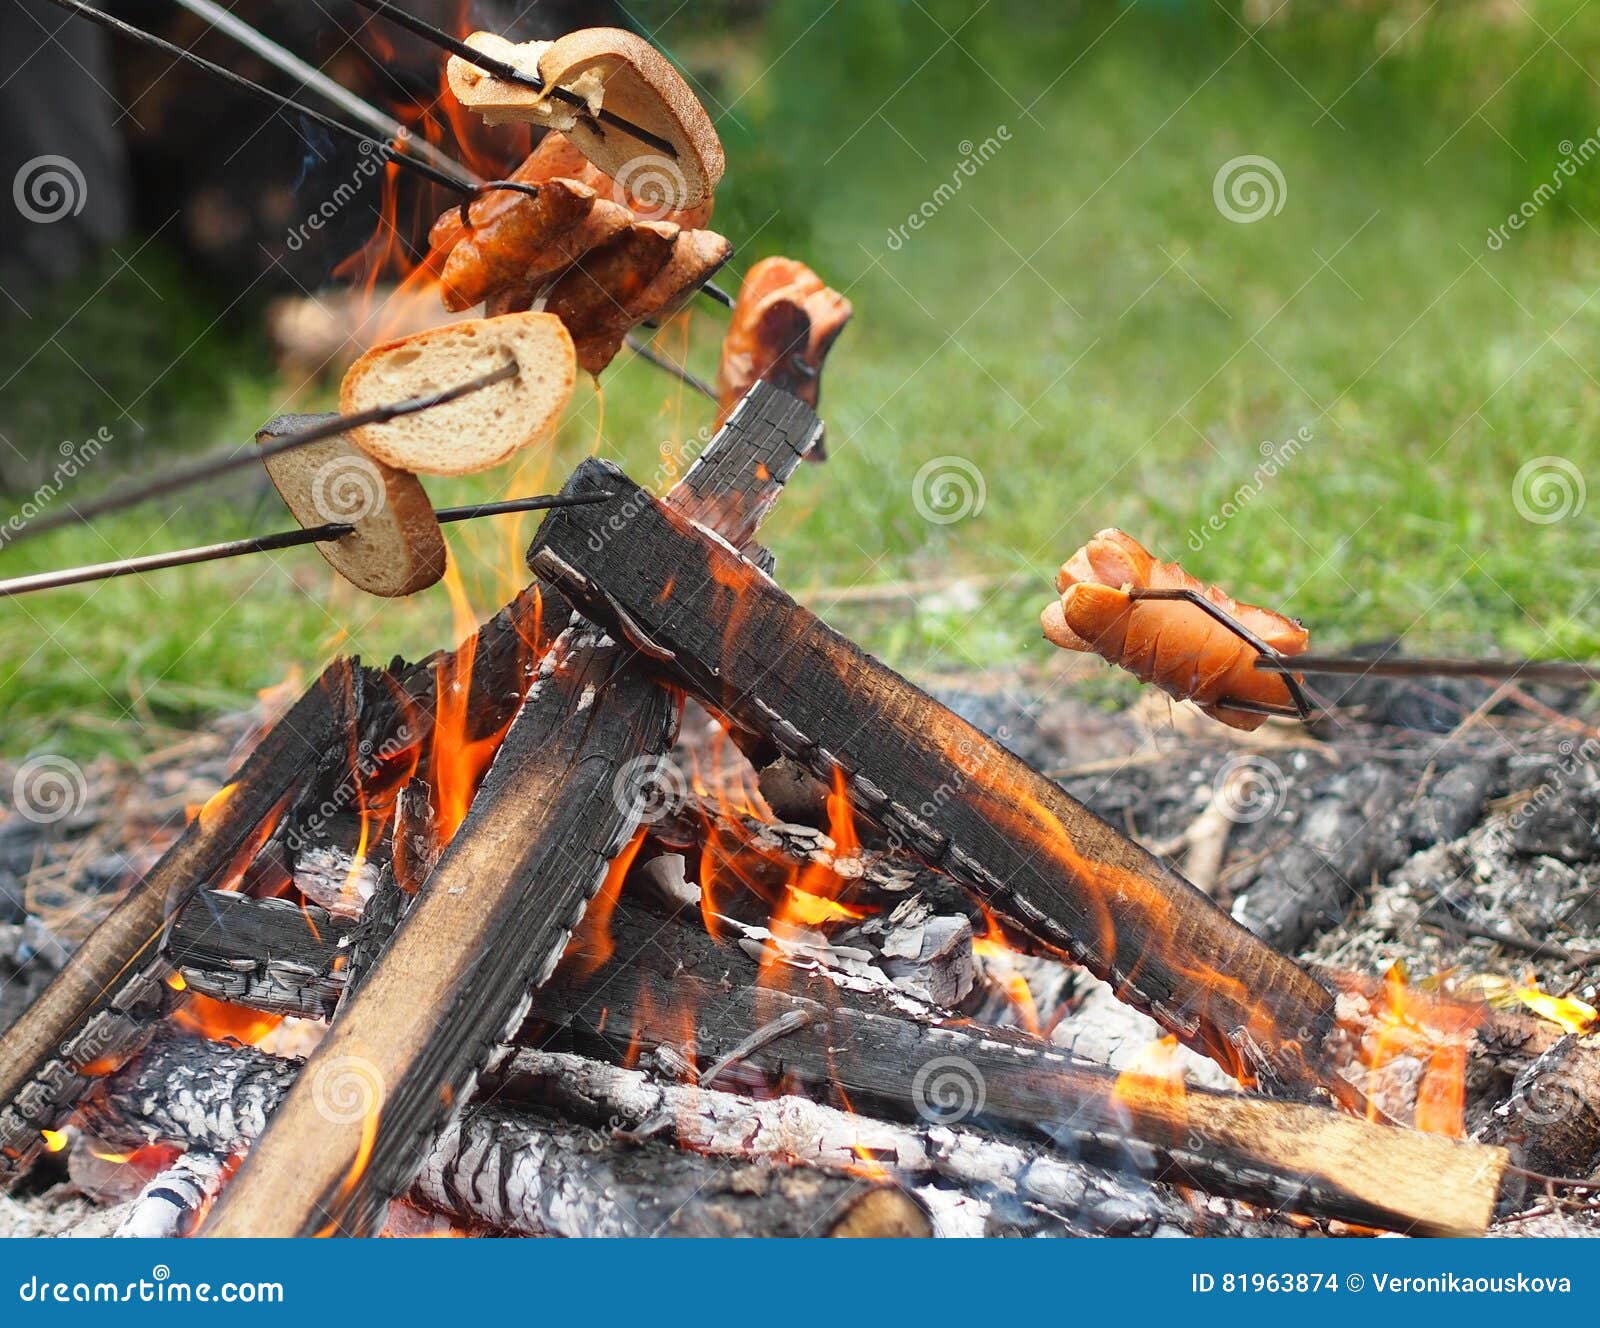 Baking Sausages on the Campfire. Stock Photo - Image of seasonal ...